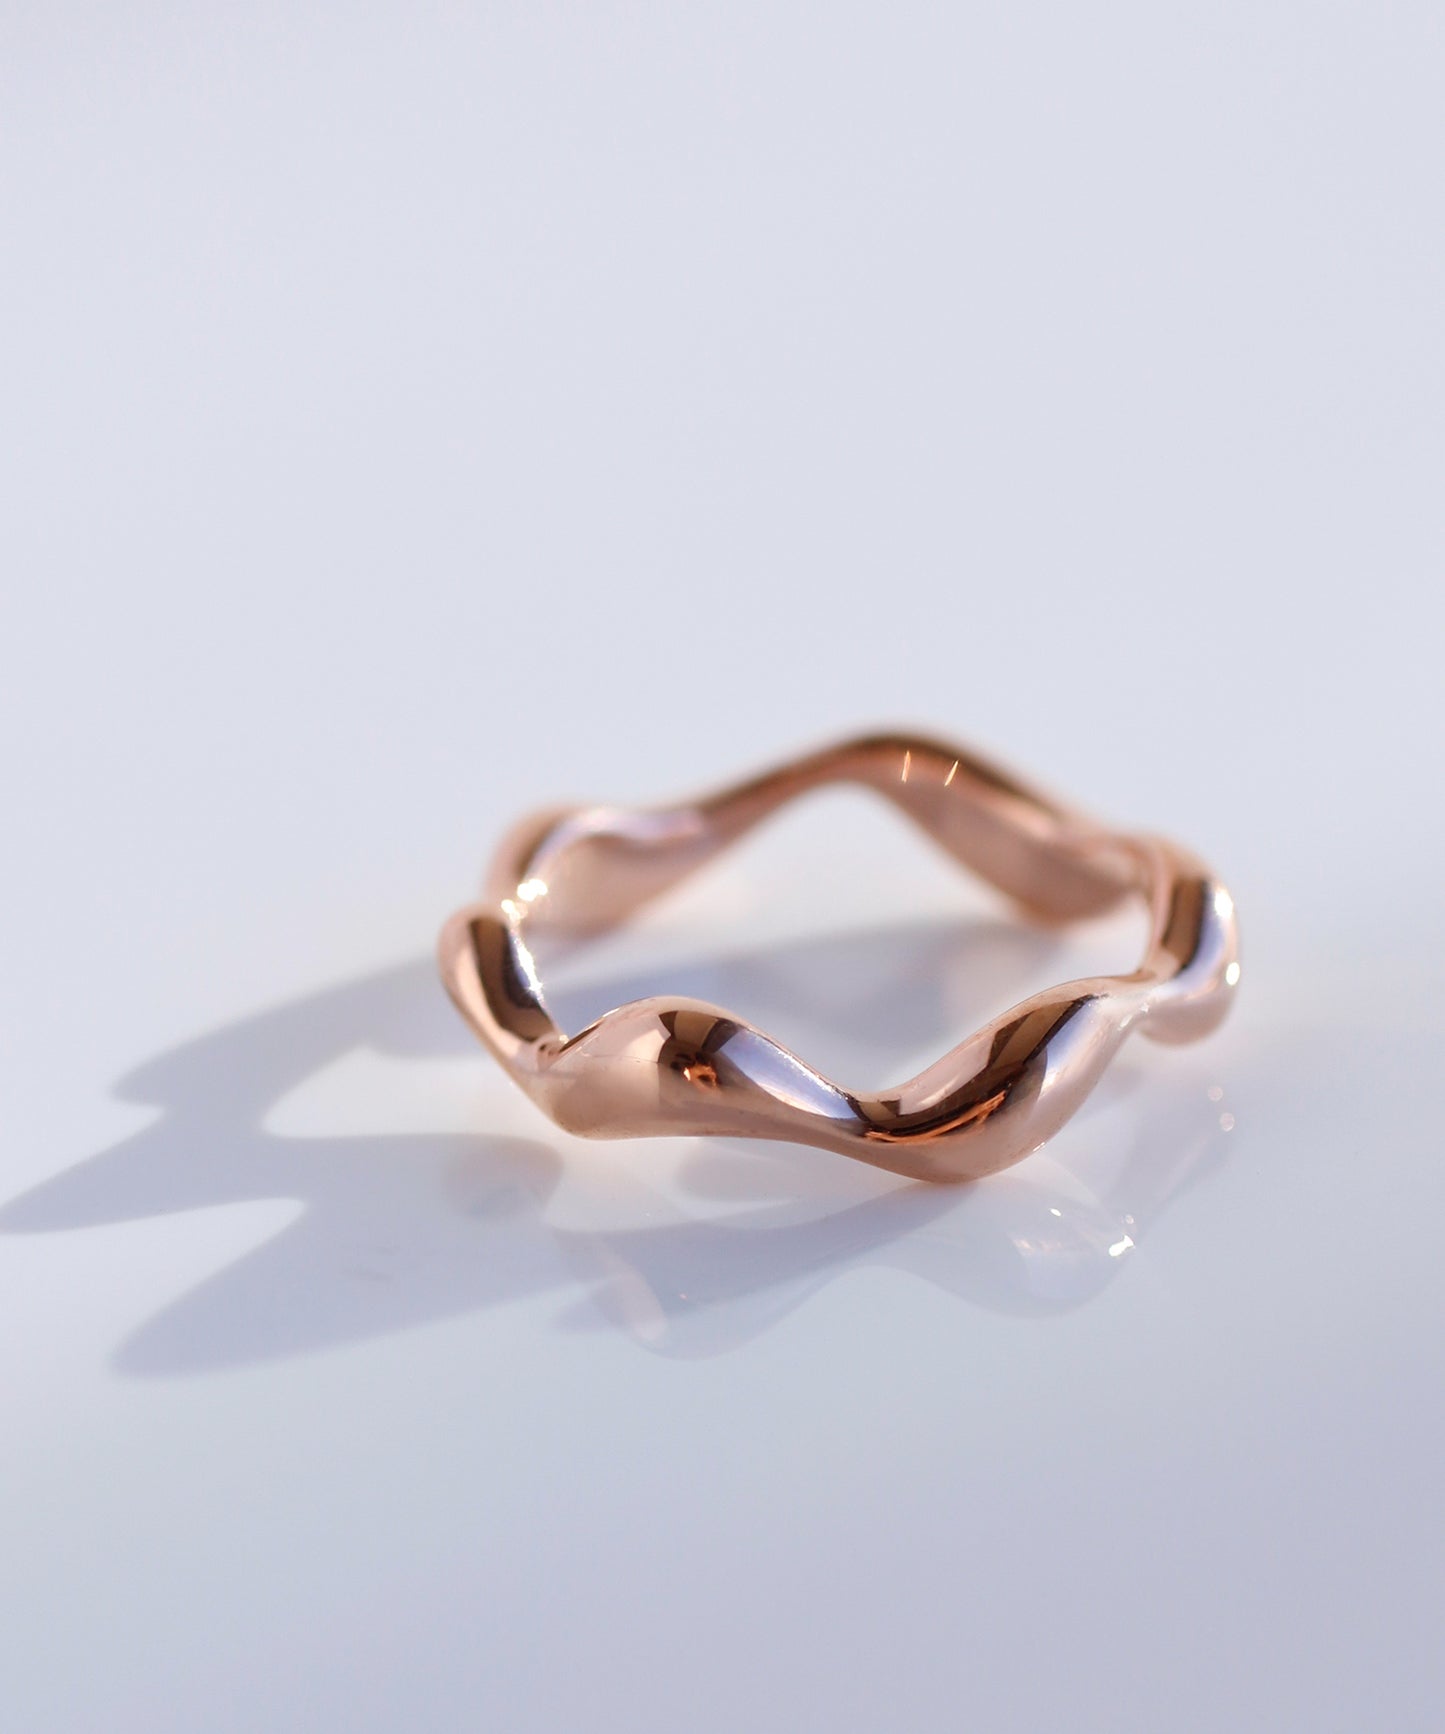 【Stainless Steel IP】 Nuance Wave Ring